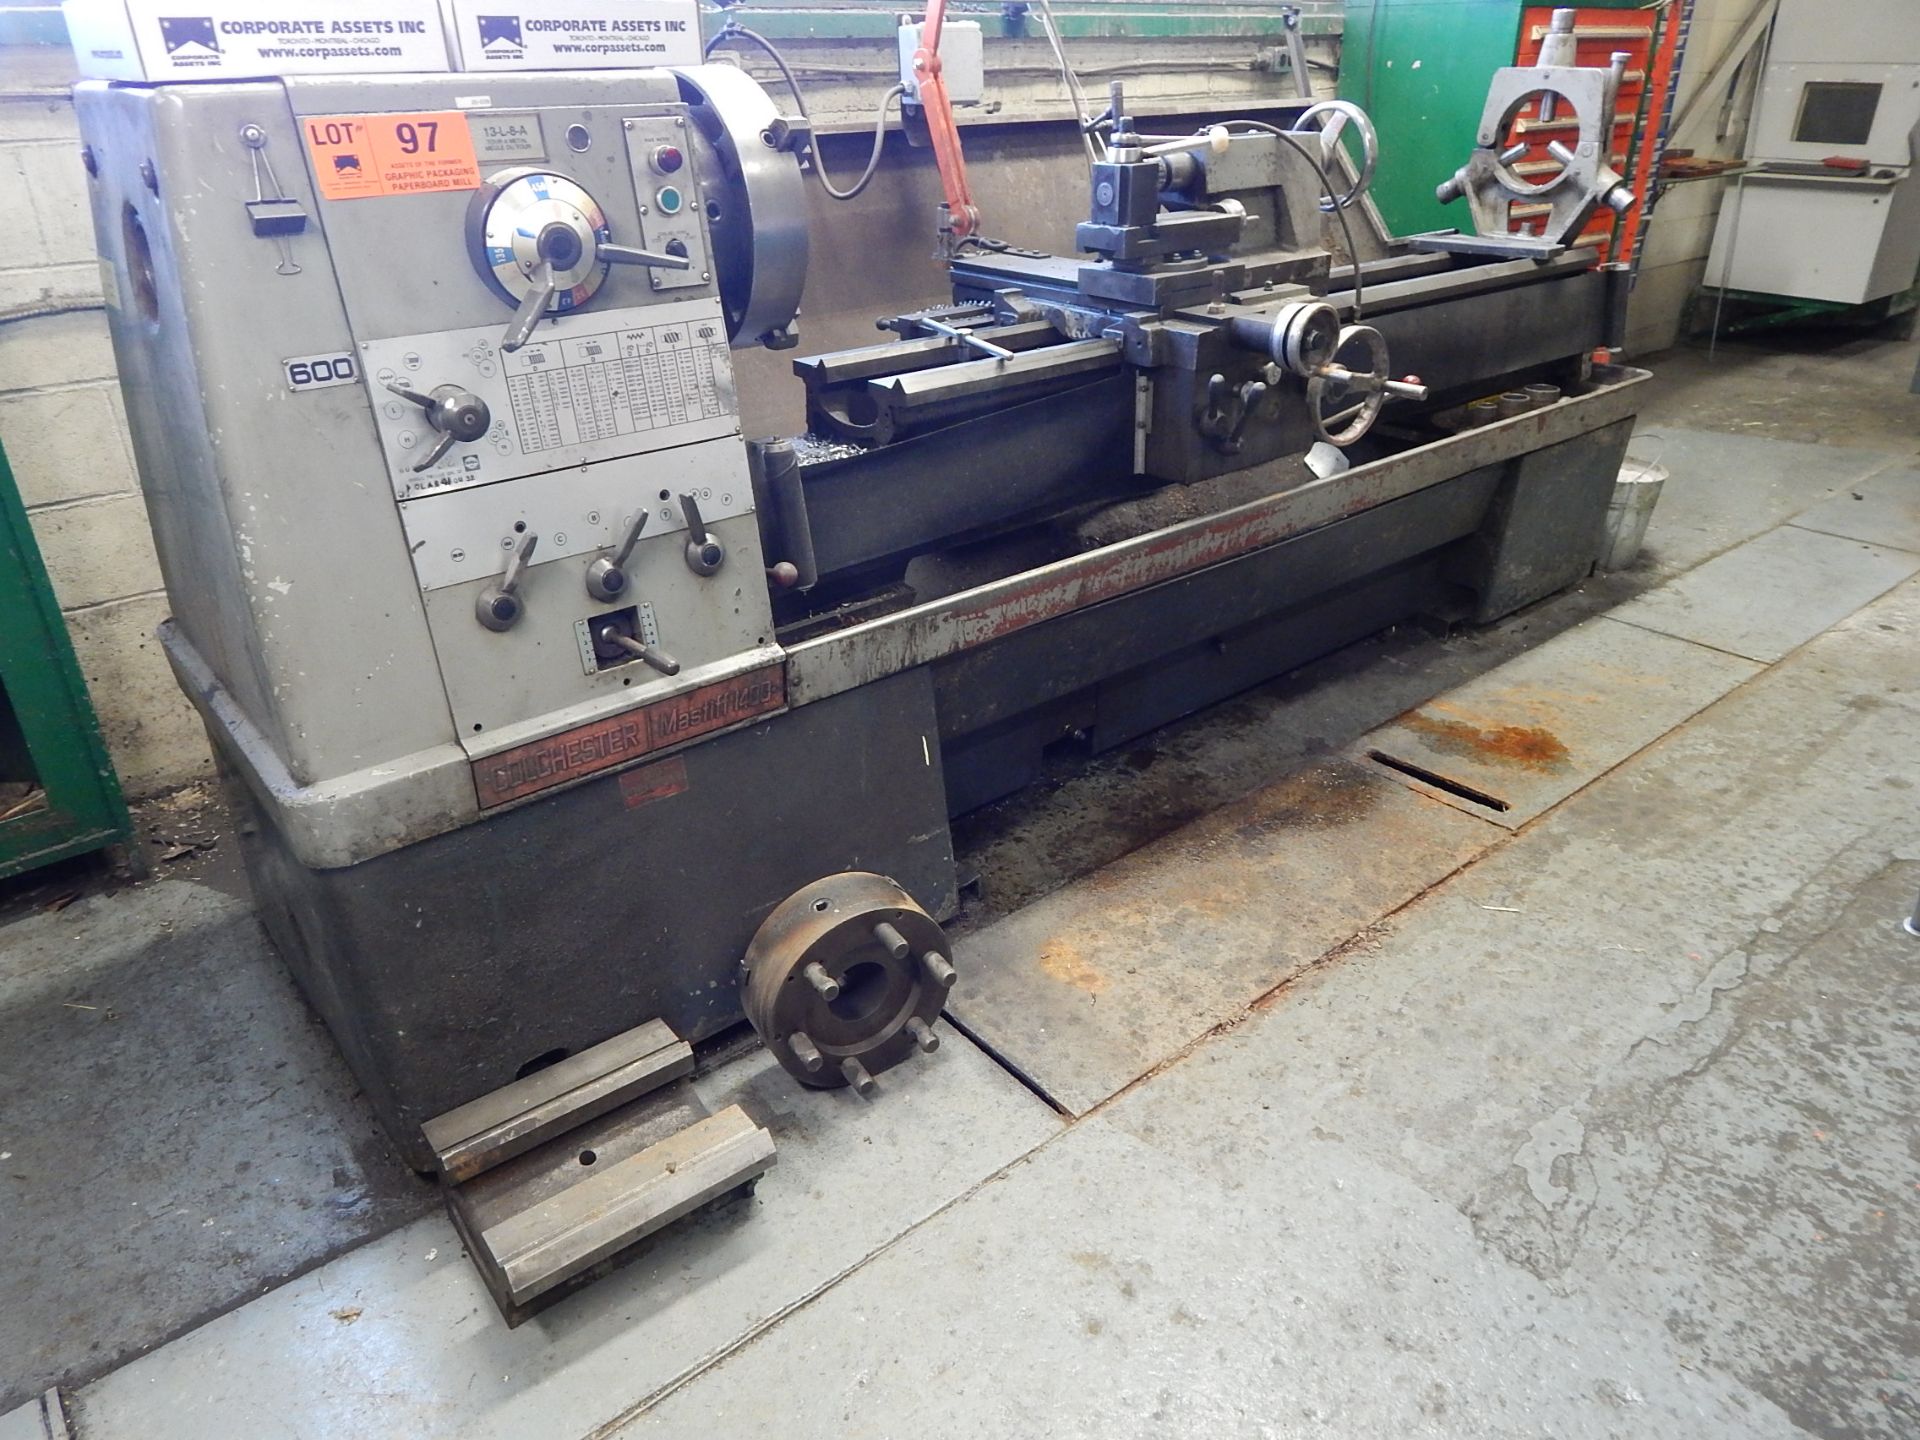 GOLCHESTER MASTIFF 1400 GAP BED ENGINE LATHE WITH 80" INBETWEEN CENTERS, 12" SPIN BED IN, 18" SPIN